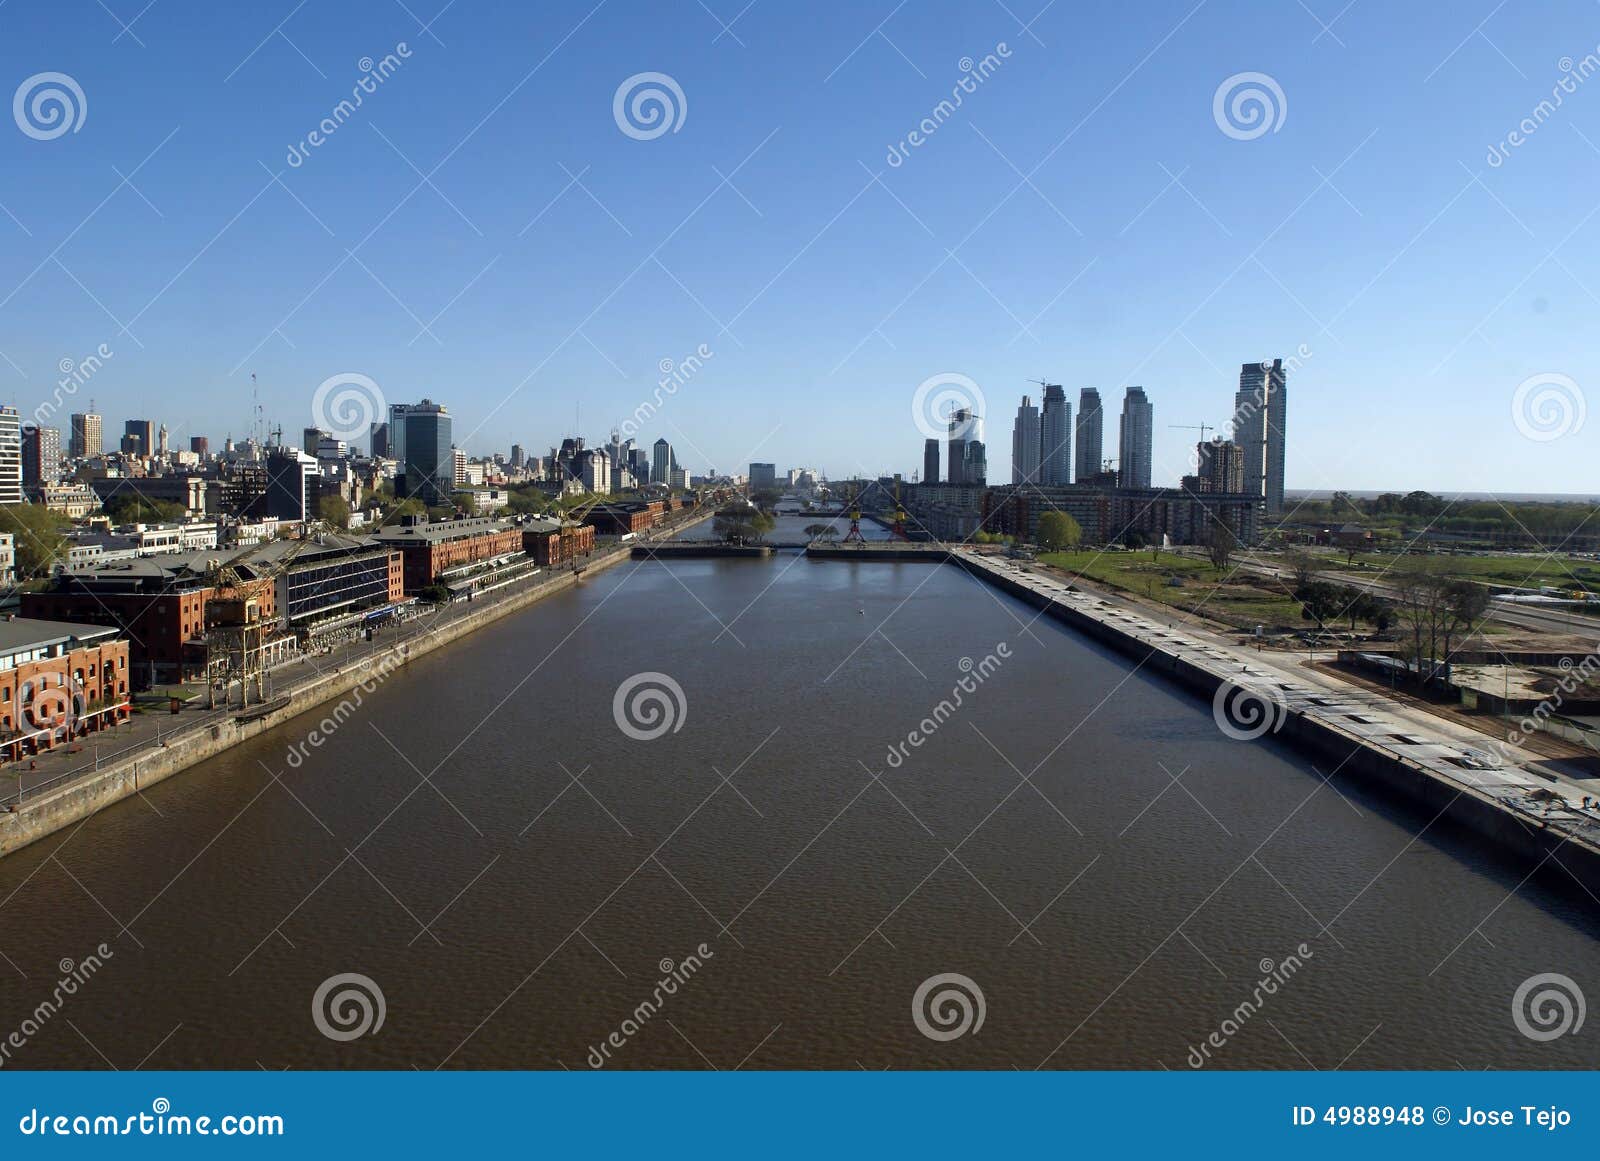 puerto madero from the air